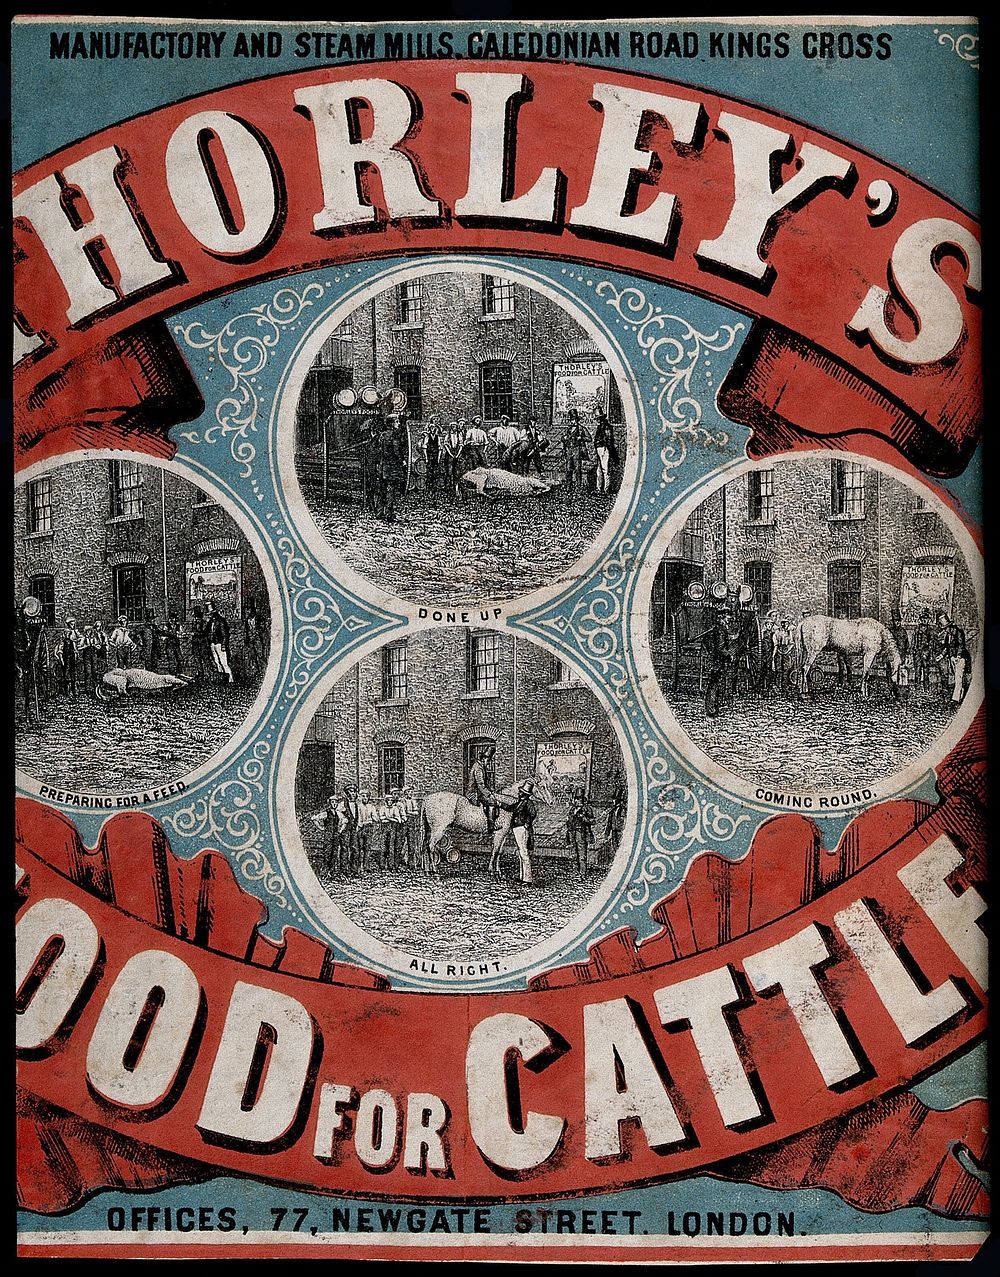 An advertisement for Thorley's cattle food. Coloured lithograph.